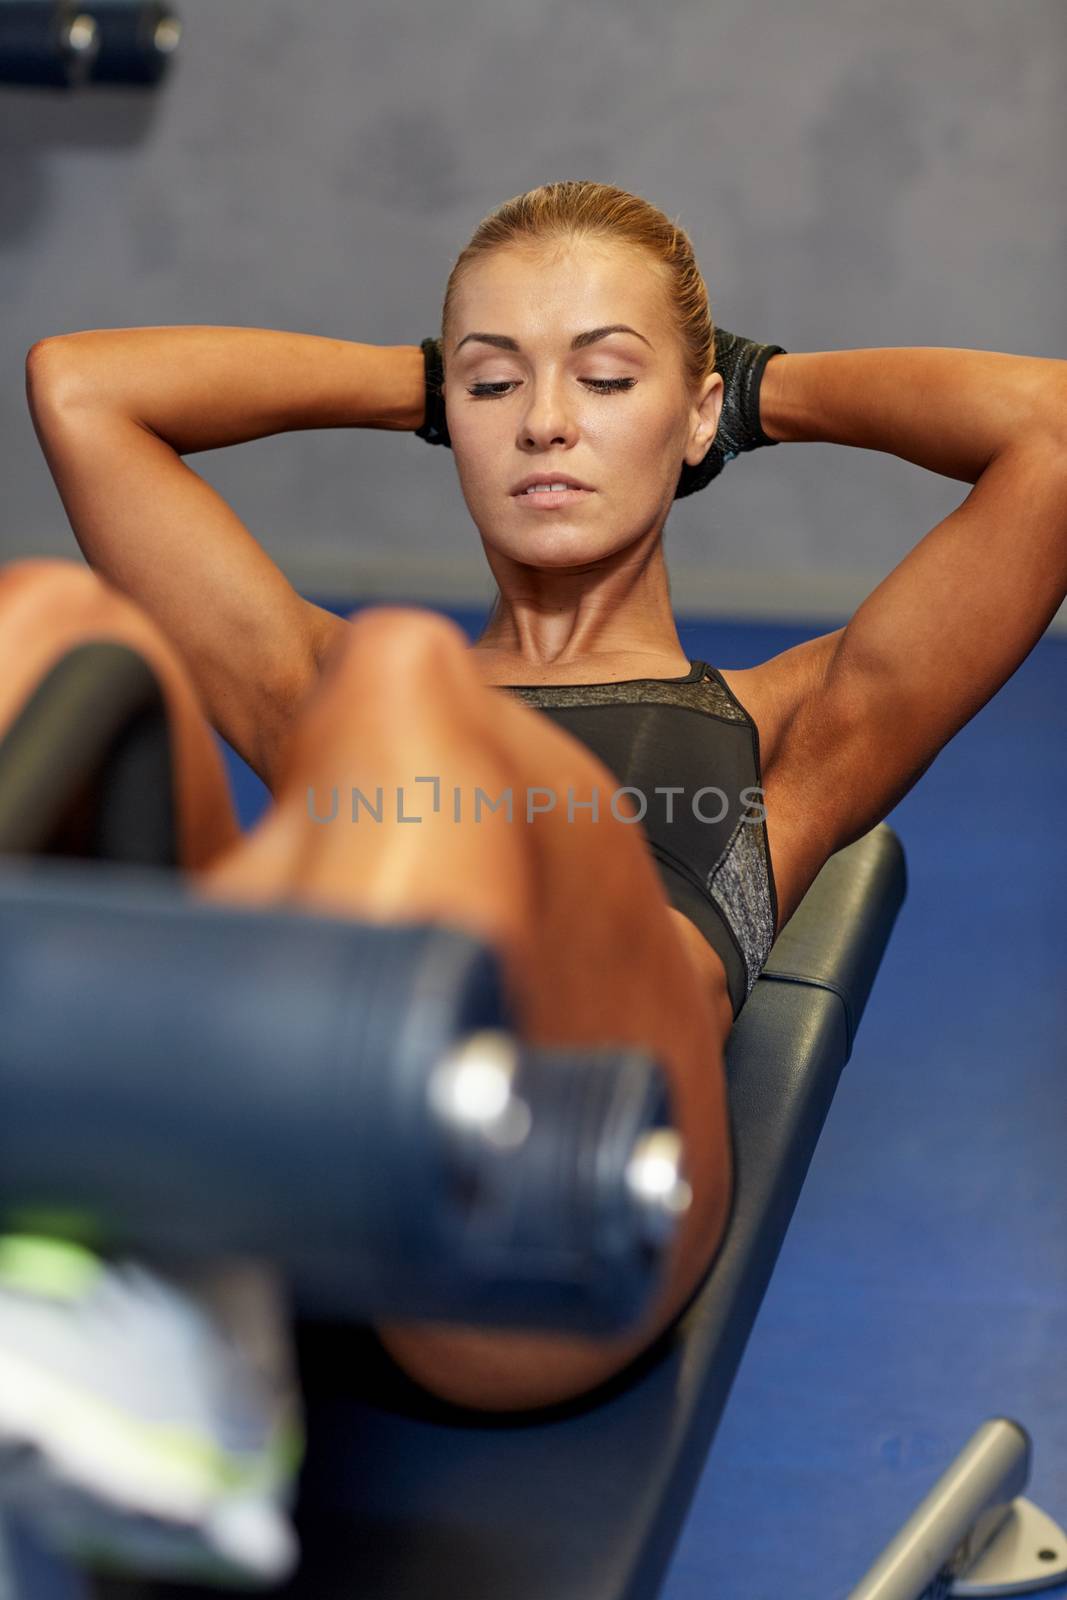 fitness, sport, training and lifestyle concept - woman flexing abdominal muscles on bench in gym